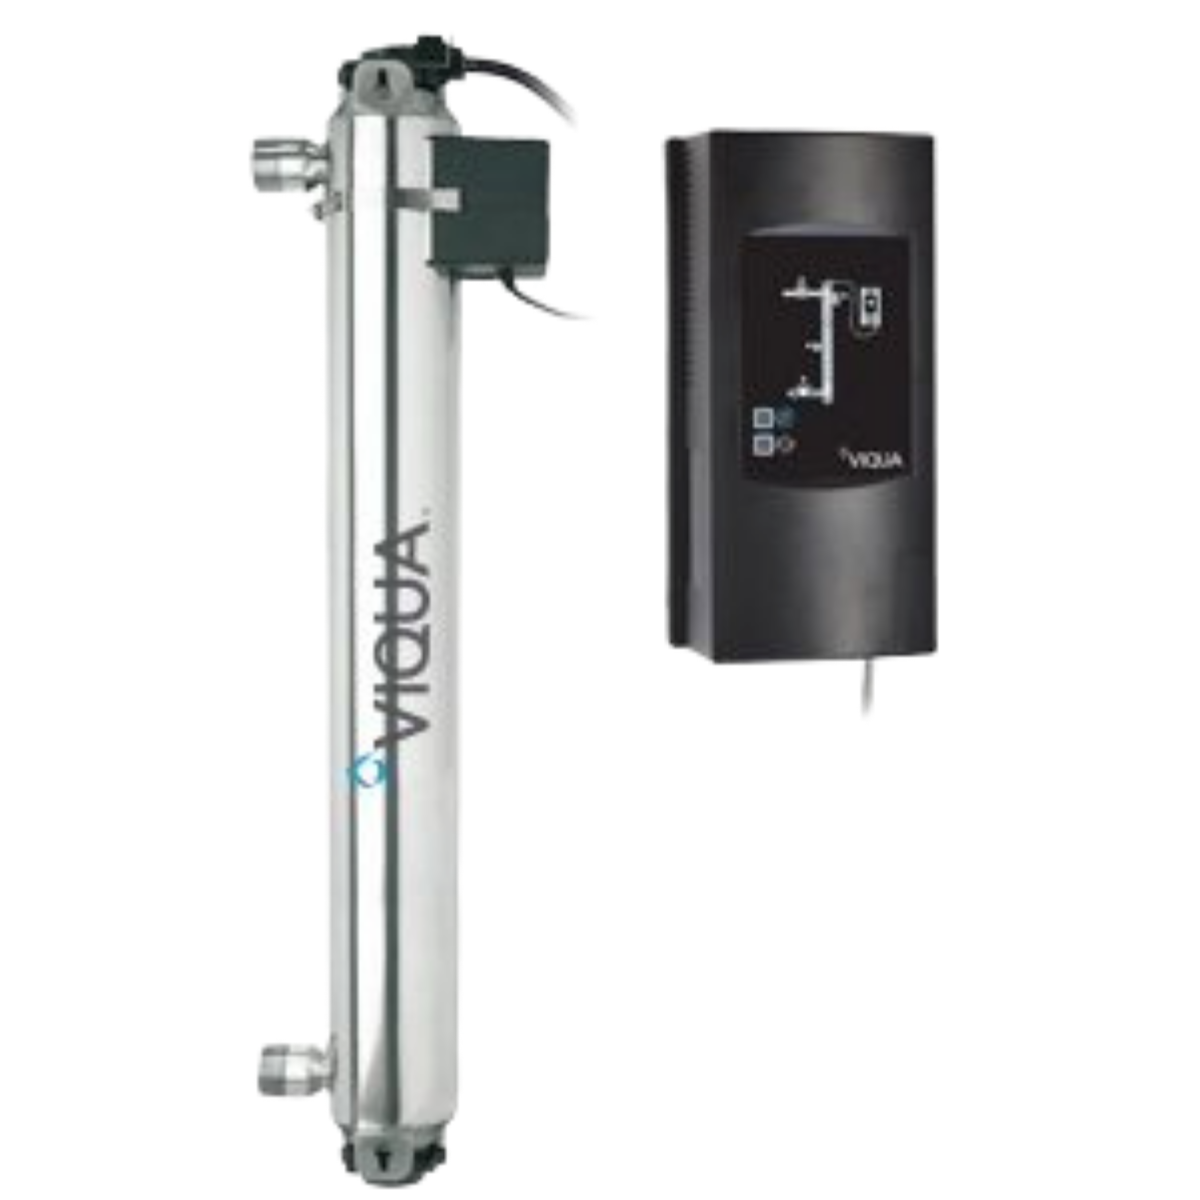 H PRO UV Water Disinfection Purification System